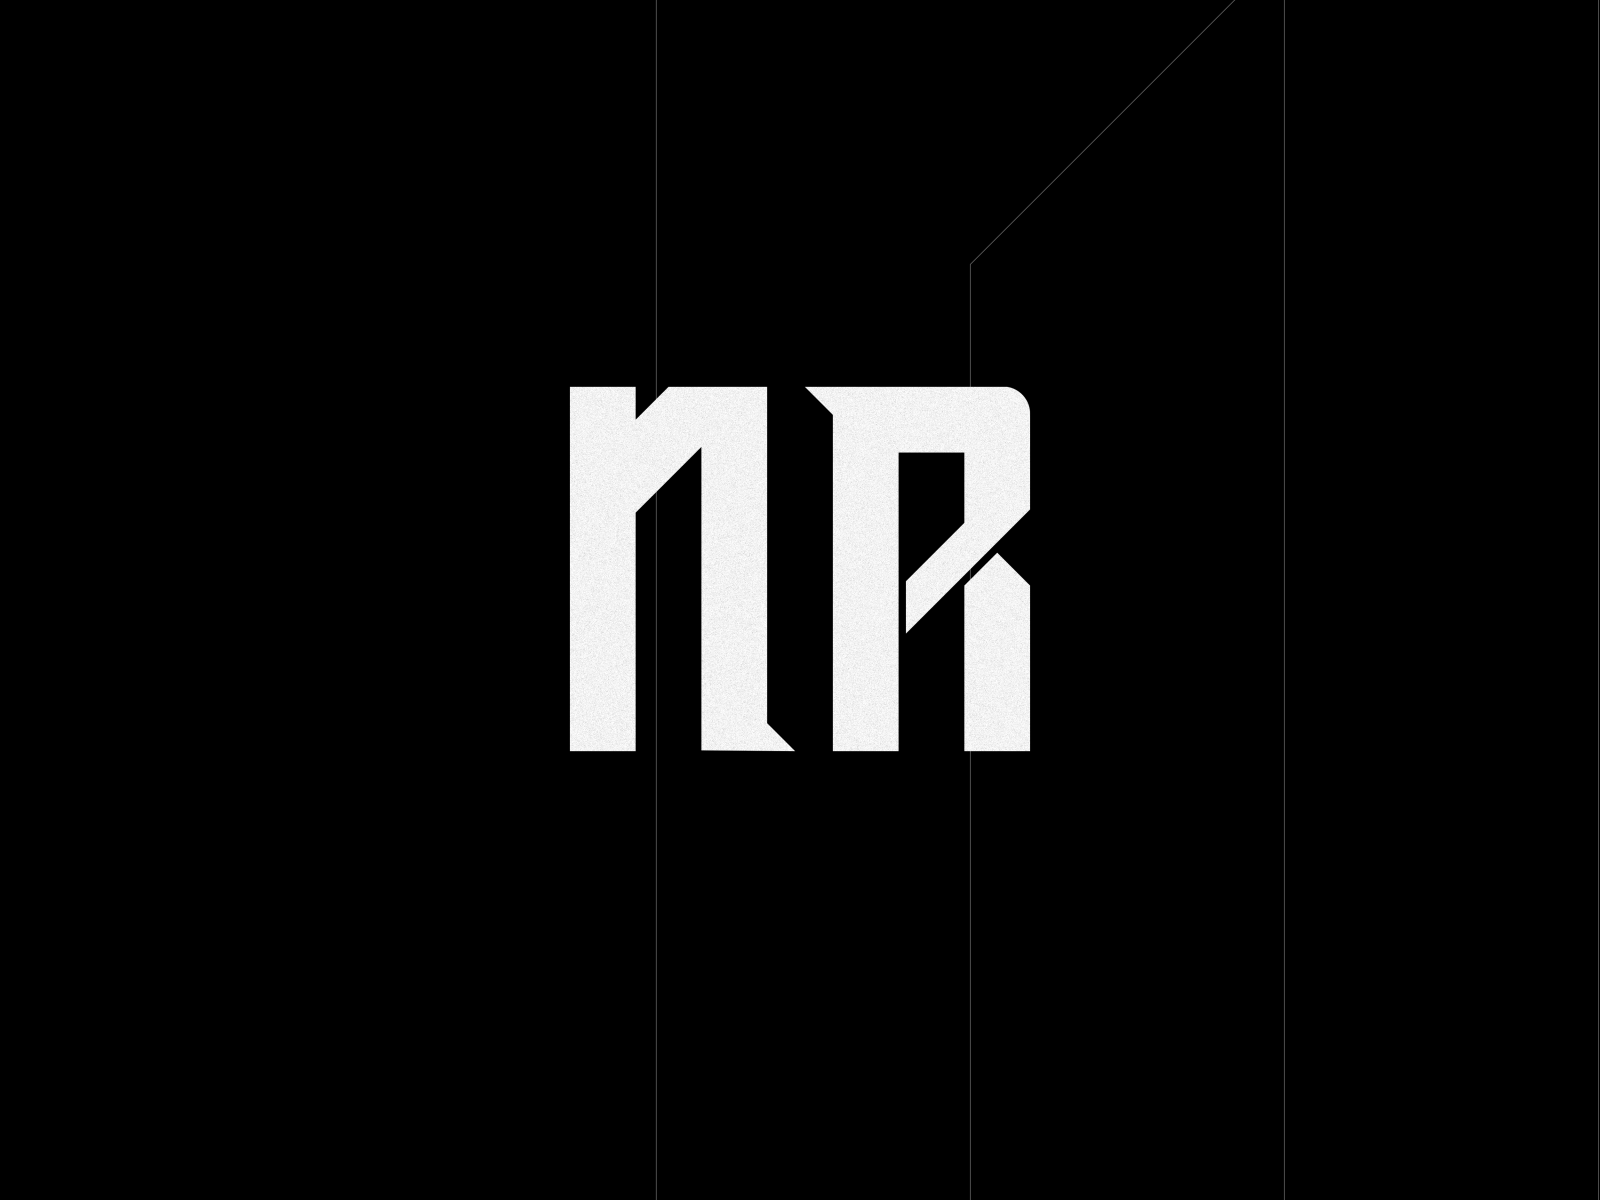 Design with Letters NPR by letterking.id on Dribbble